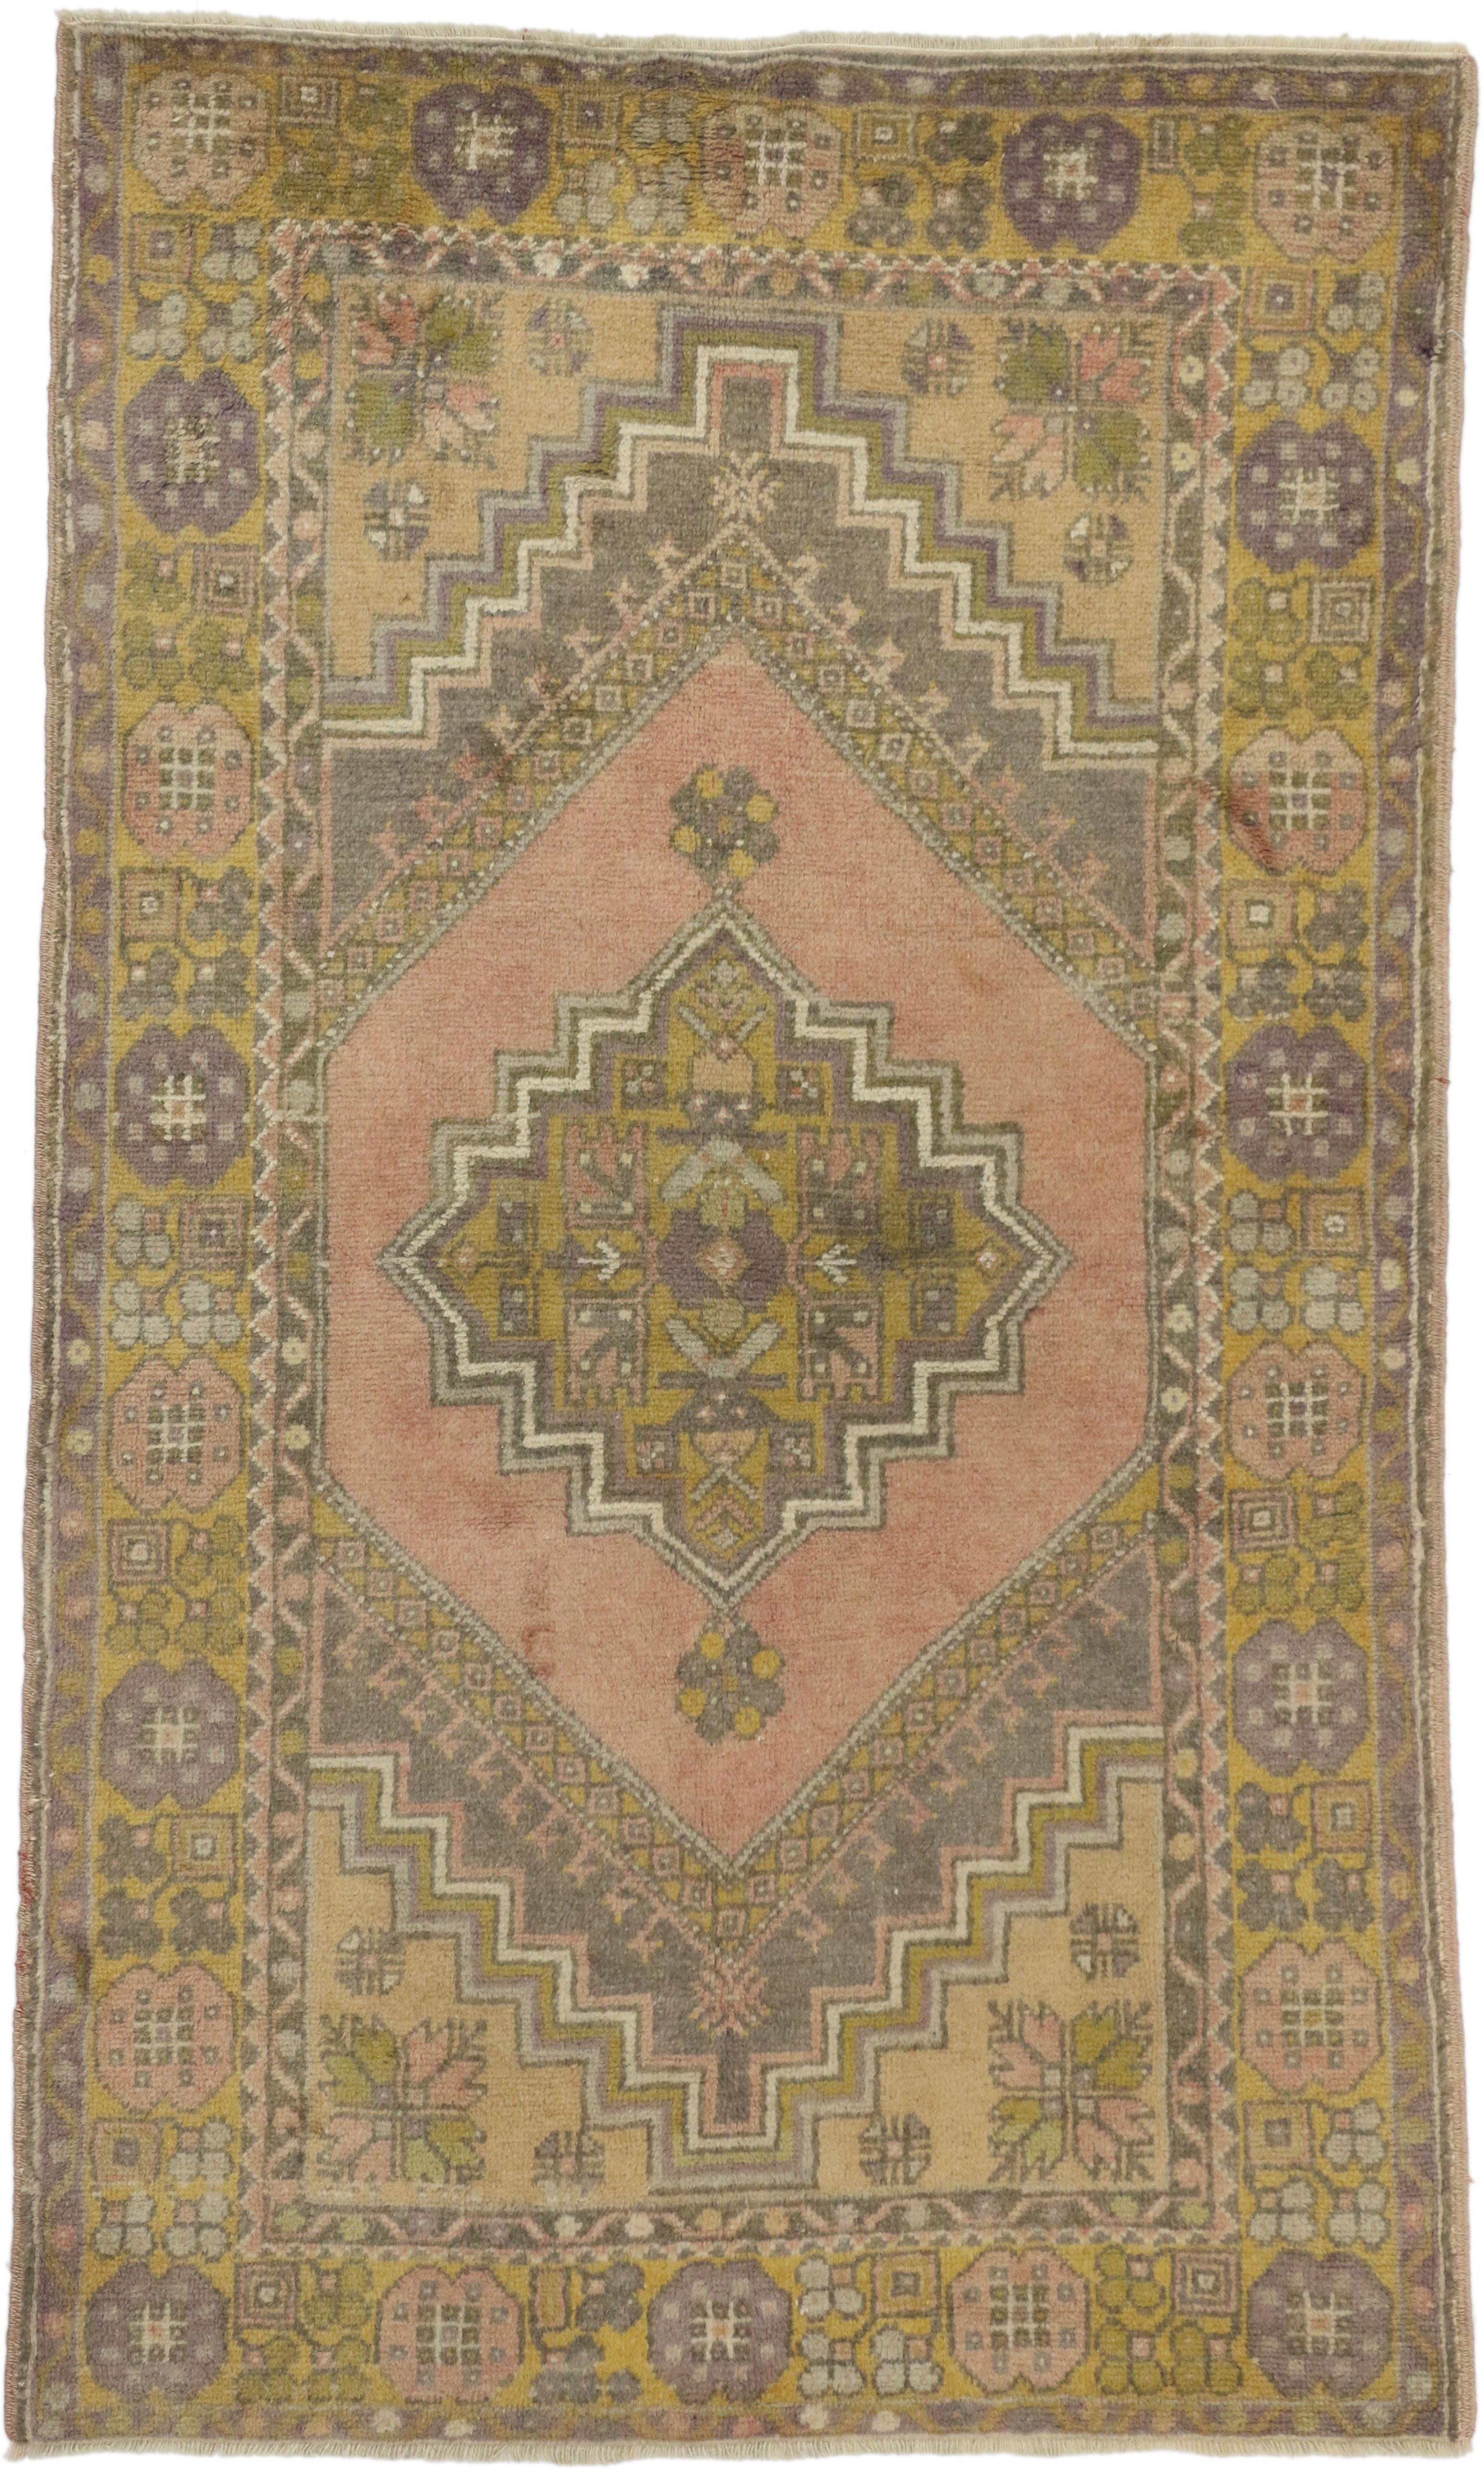 50192 Vintage Turkish Oushak Accent Rug with French Provincial Style, Small Turkish Accent Rug 03'06 X 05'10. Balancing French Provincial style and soft pastel colors, this hand knotted wool vintage Turkish Oushak rug imparts a sense of warmth and